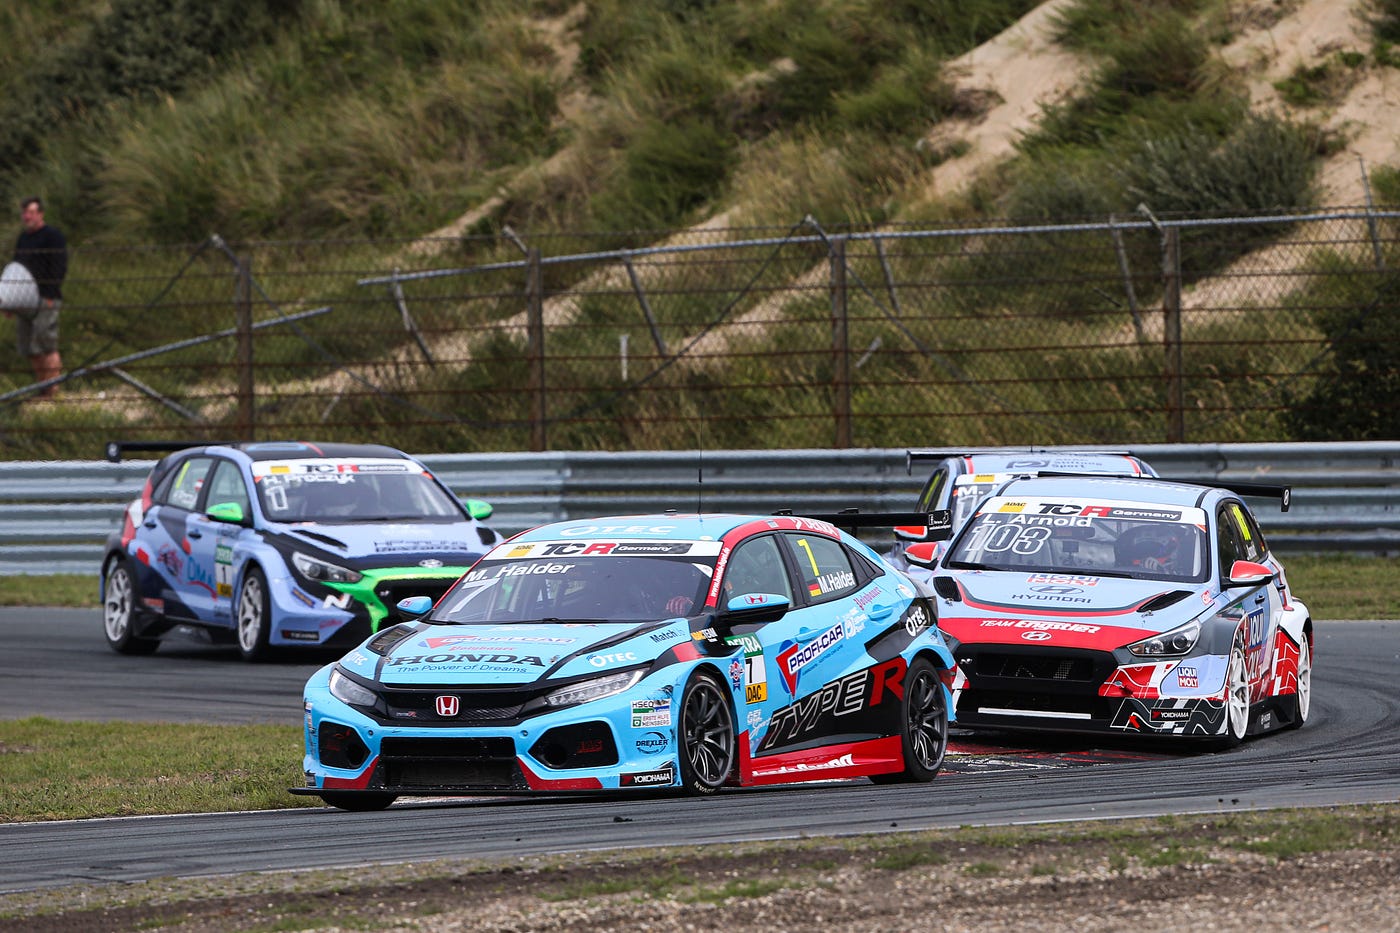 ADAC takes over as promoter of the TCR Germany championship from Engstler |  by Neil Hudson | Medium